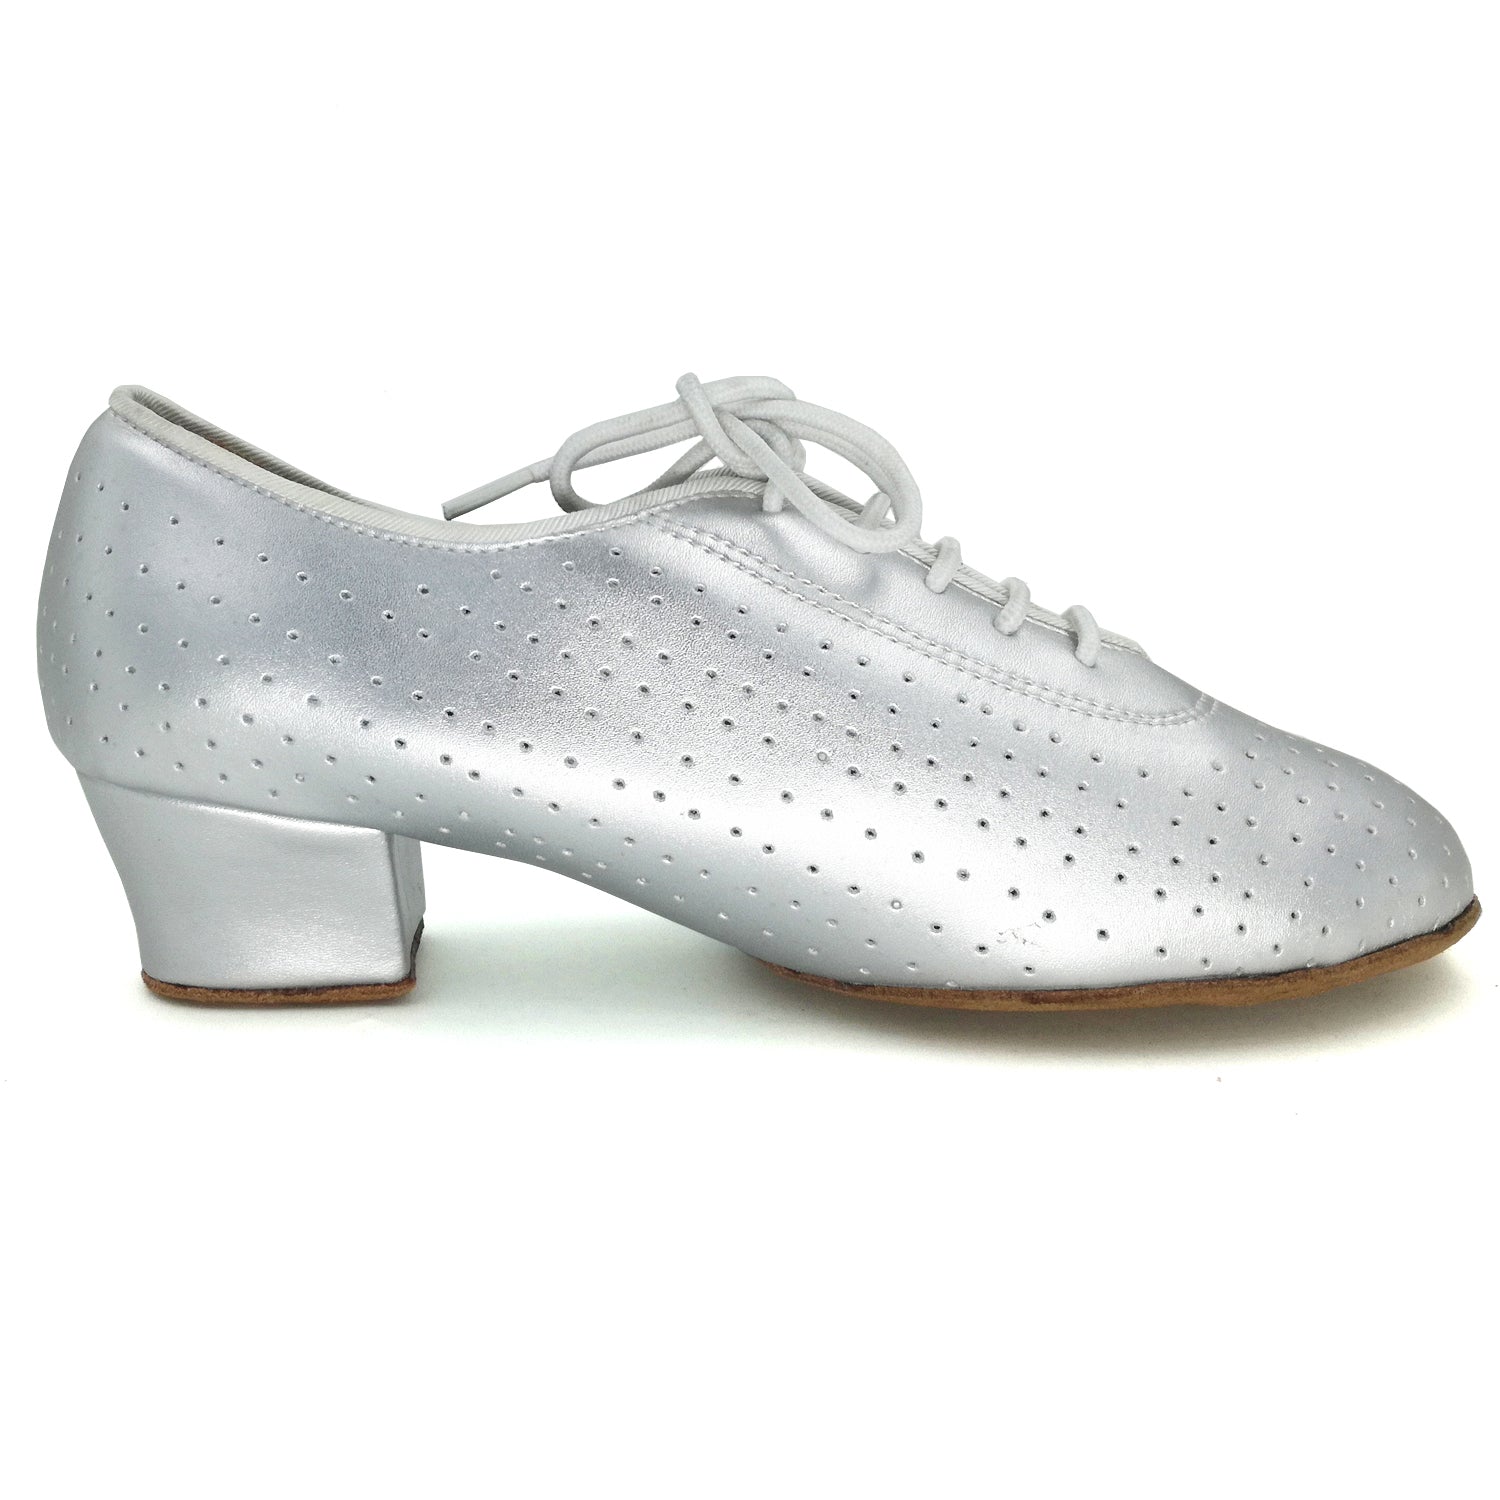 Women Ballroom Dancing Shoes with Suede Sole and Lace-up Closed-toe Design in Silver for Tango Latin Practice (PD5003B)2